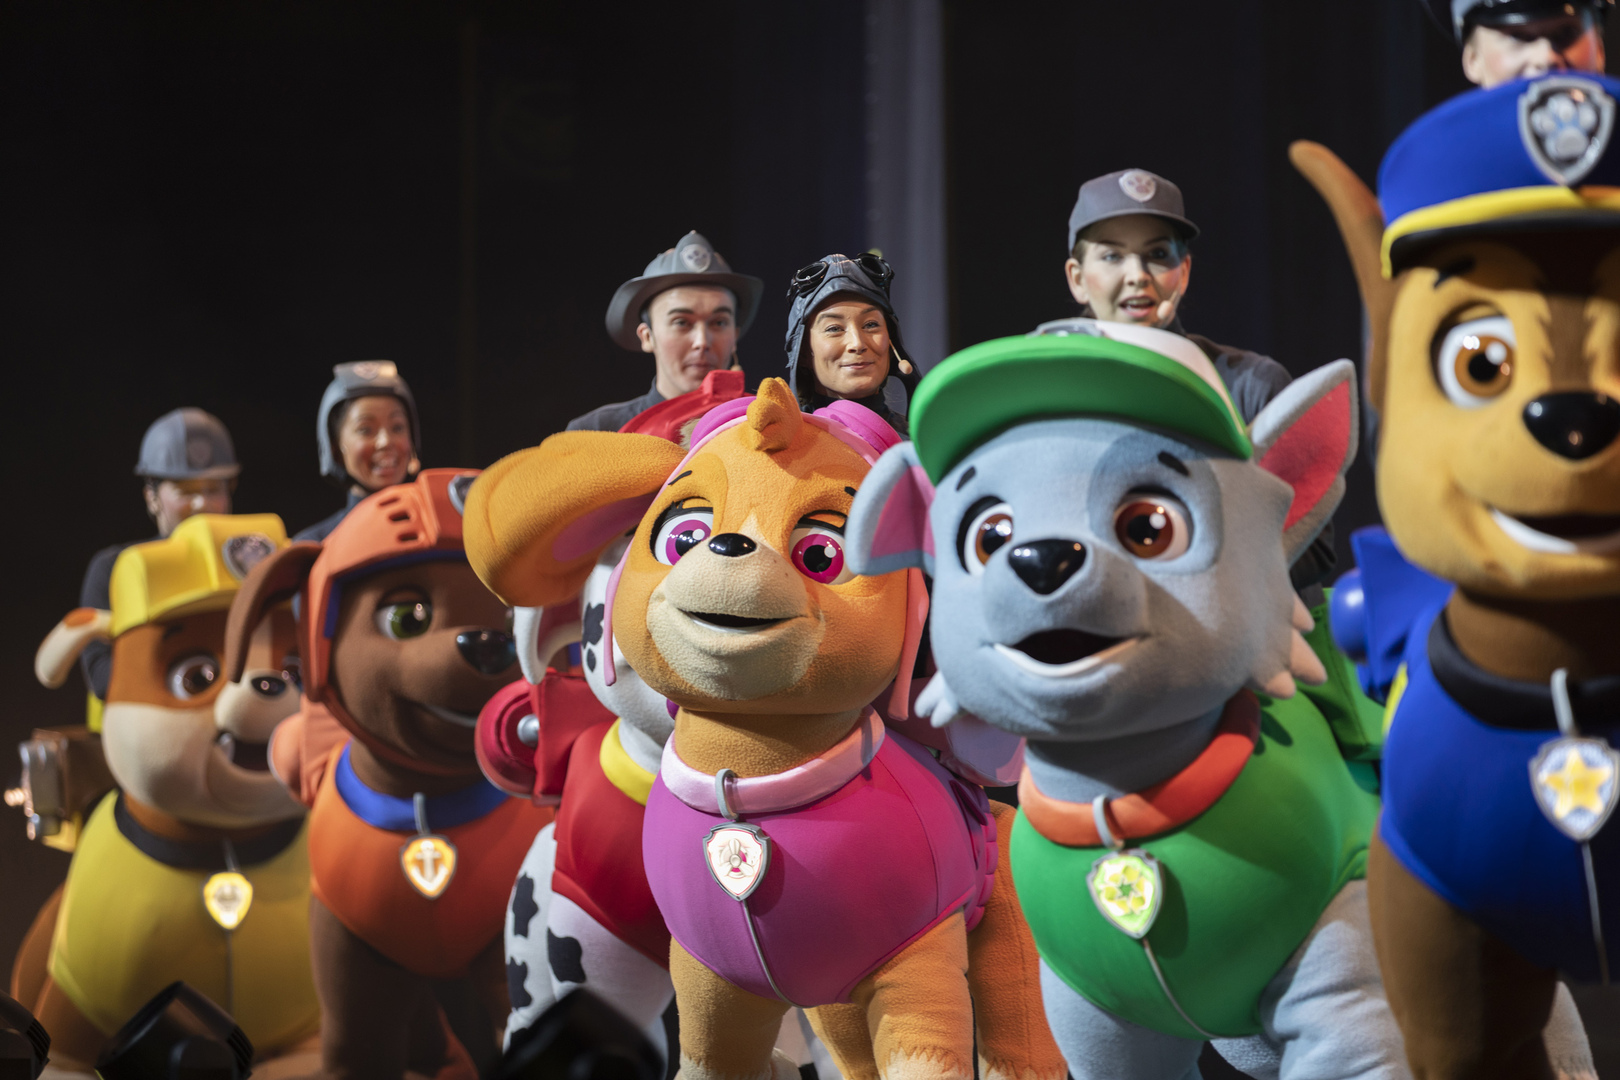 PAW Patrol Live! "Race to Exhibitions